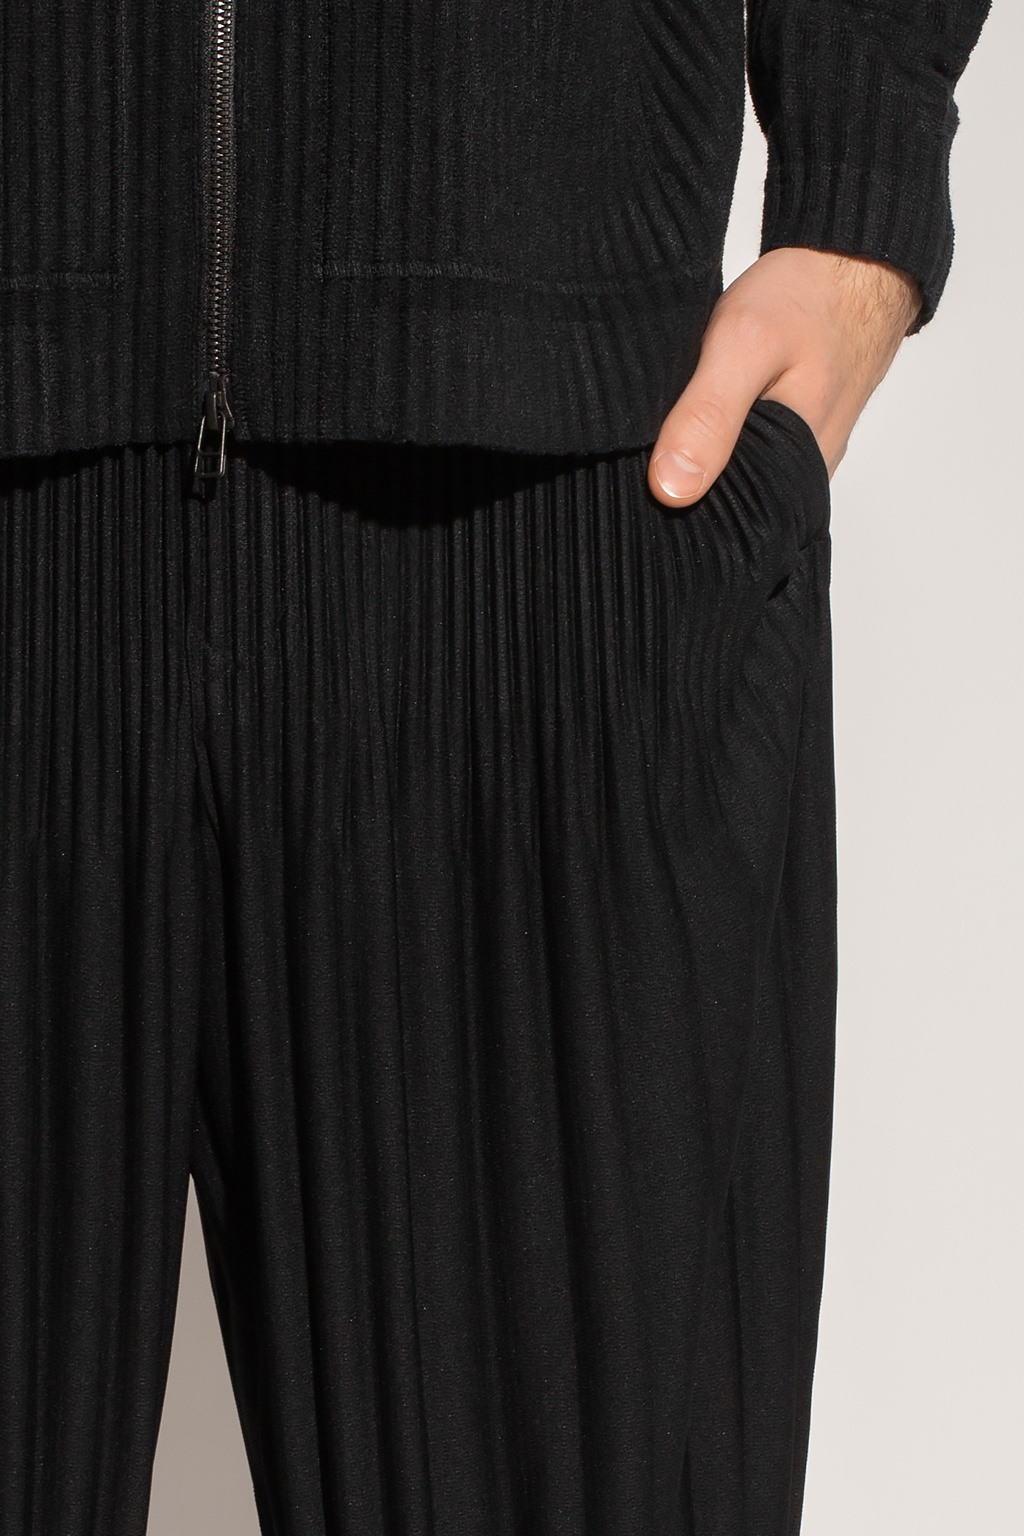 Zara Men Issey Miyake Pleated Trousers Pants Mens Fashion Bottoms  Trousers on Carousell